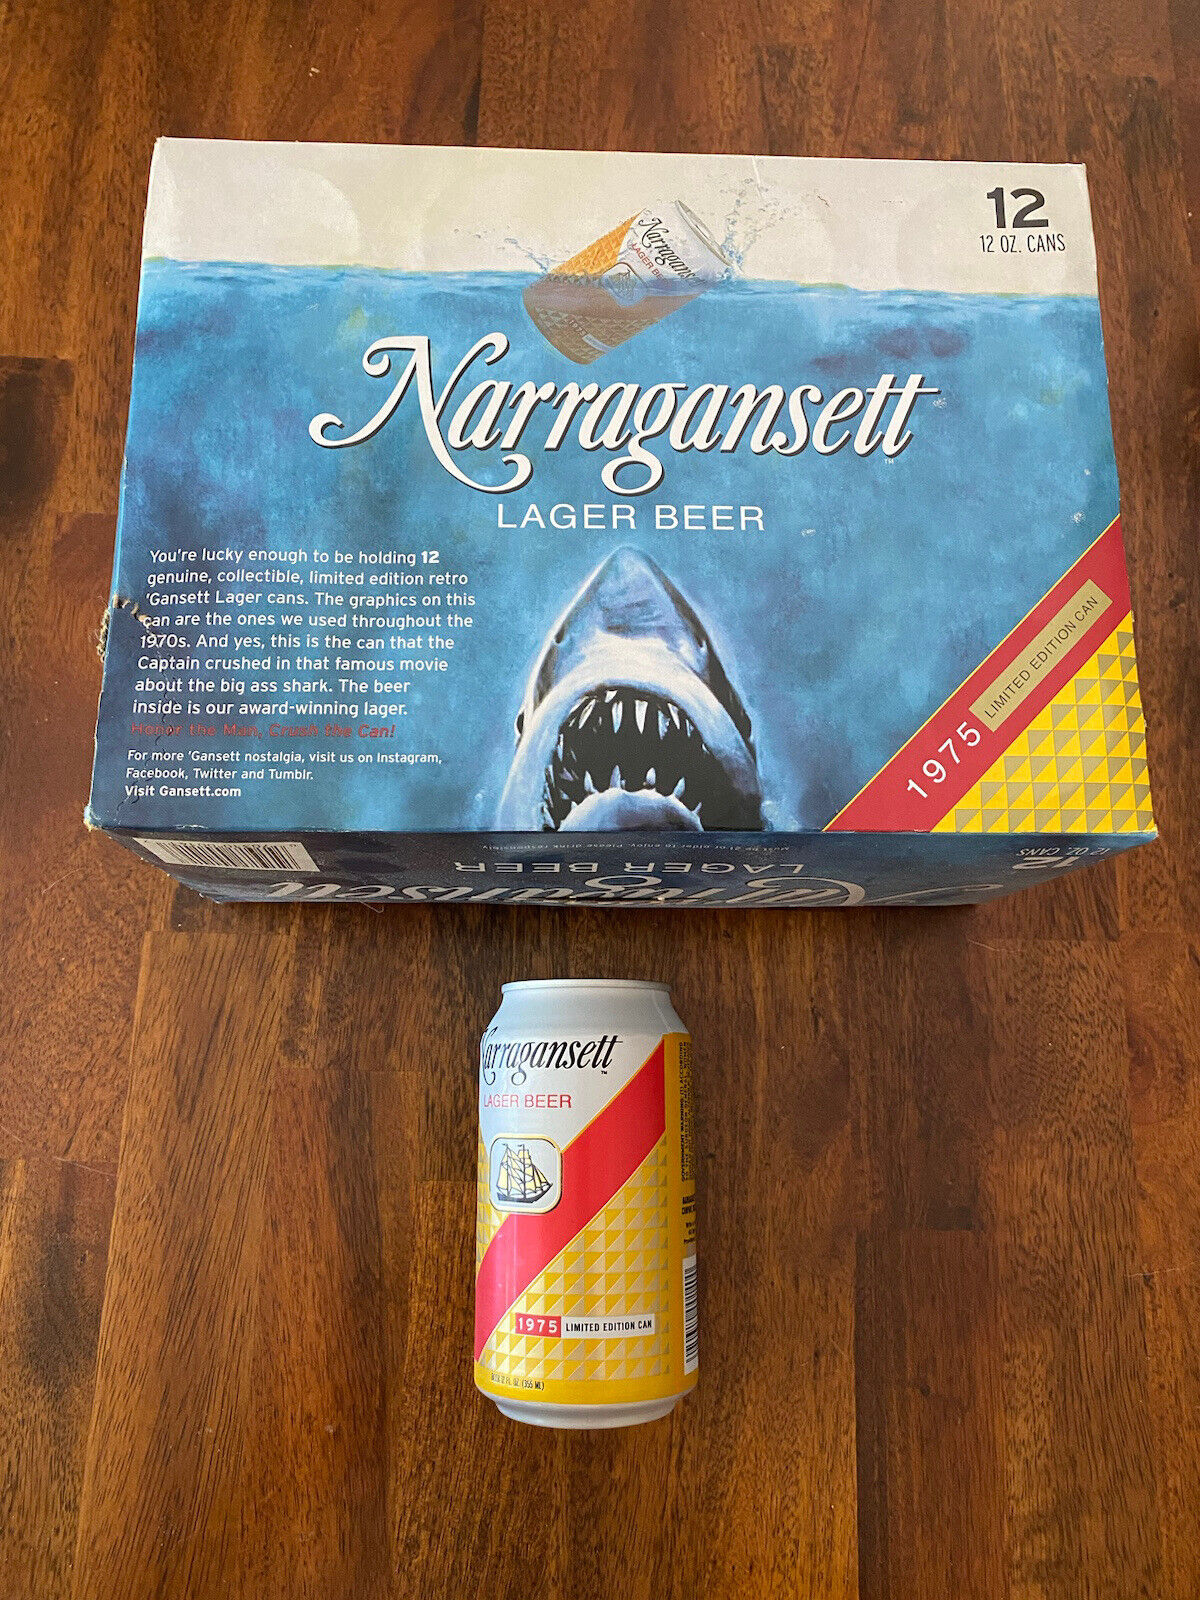 🦈JAWS Quint 1975 Retro Narragansett Lager Beer 12 Pack EMPTY BOX + (1) Open Can